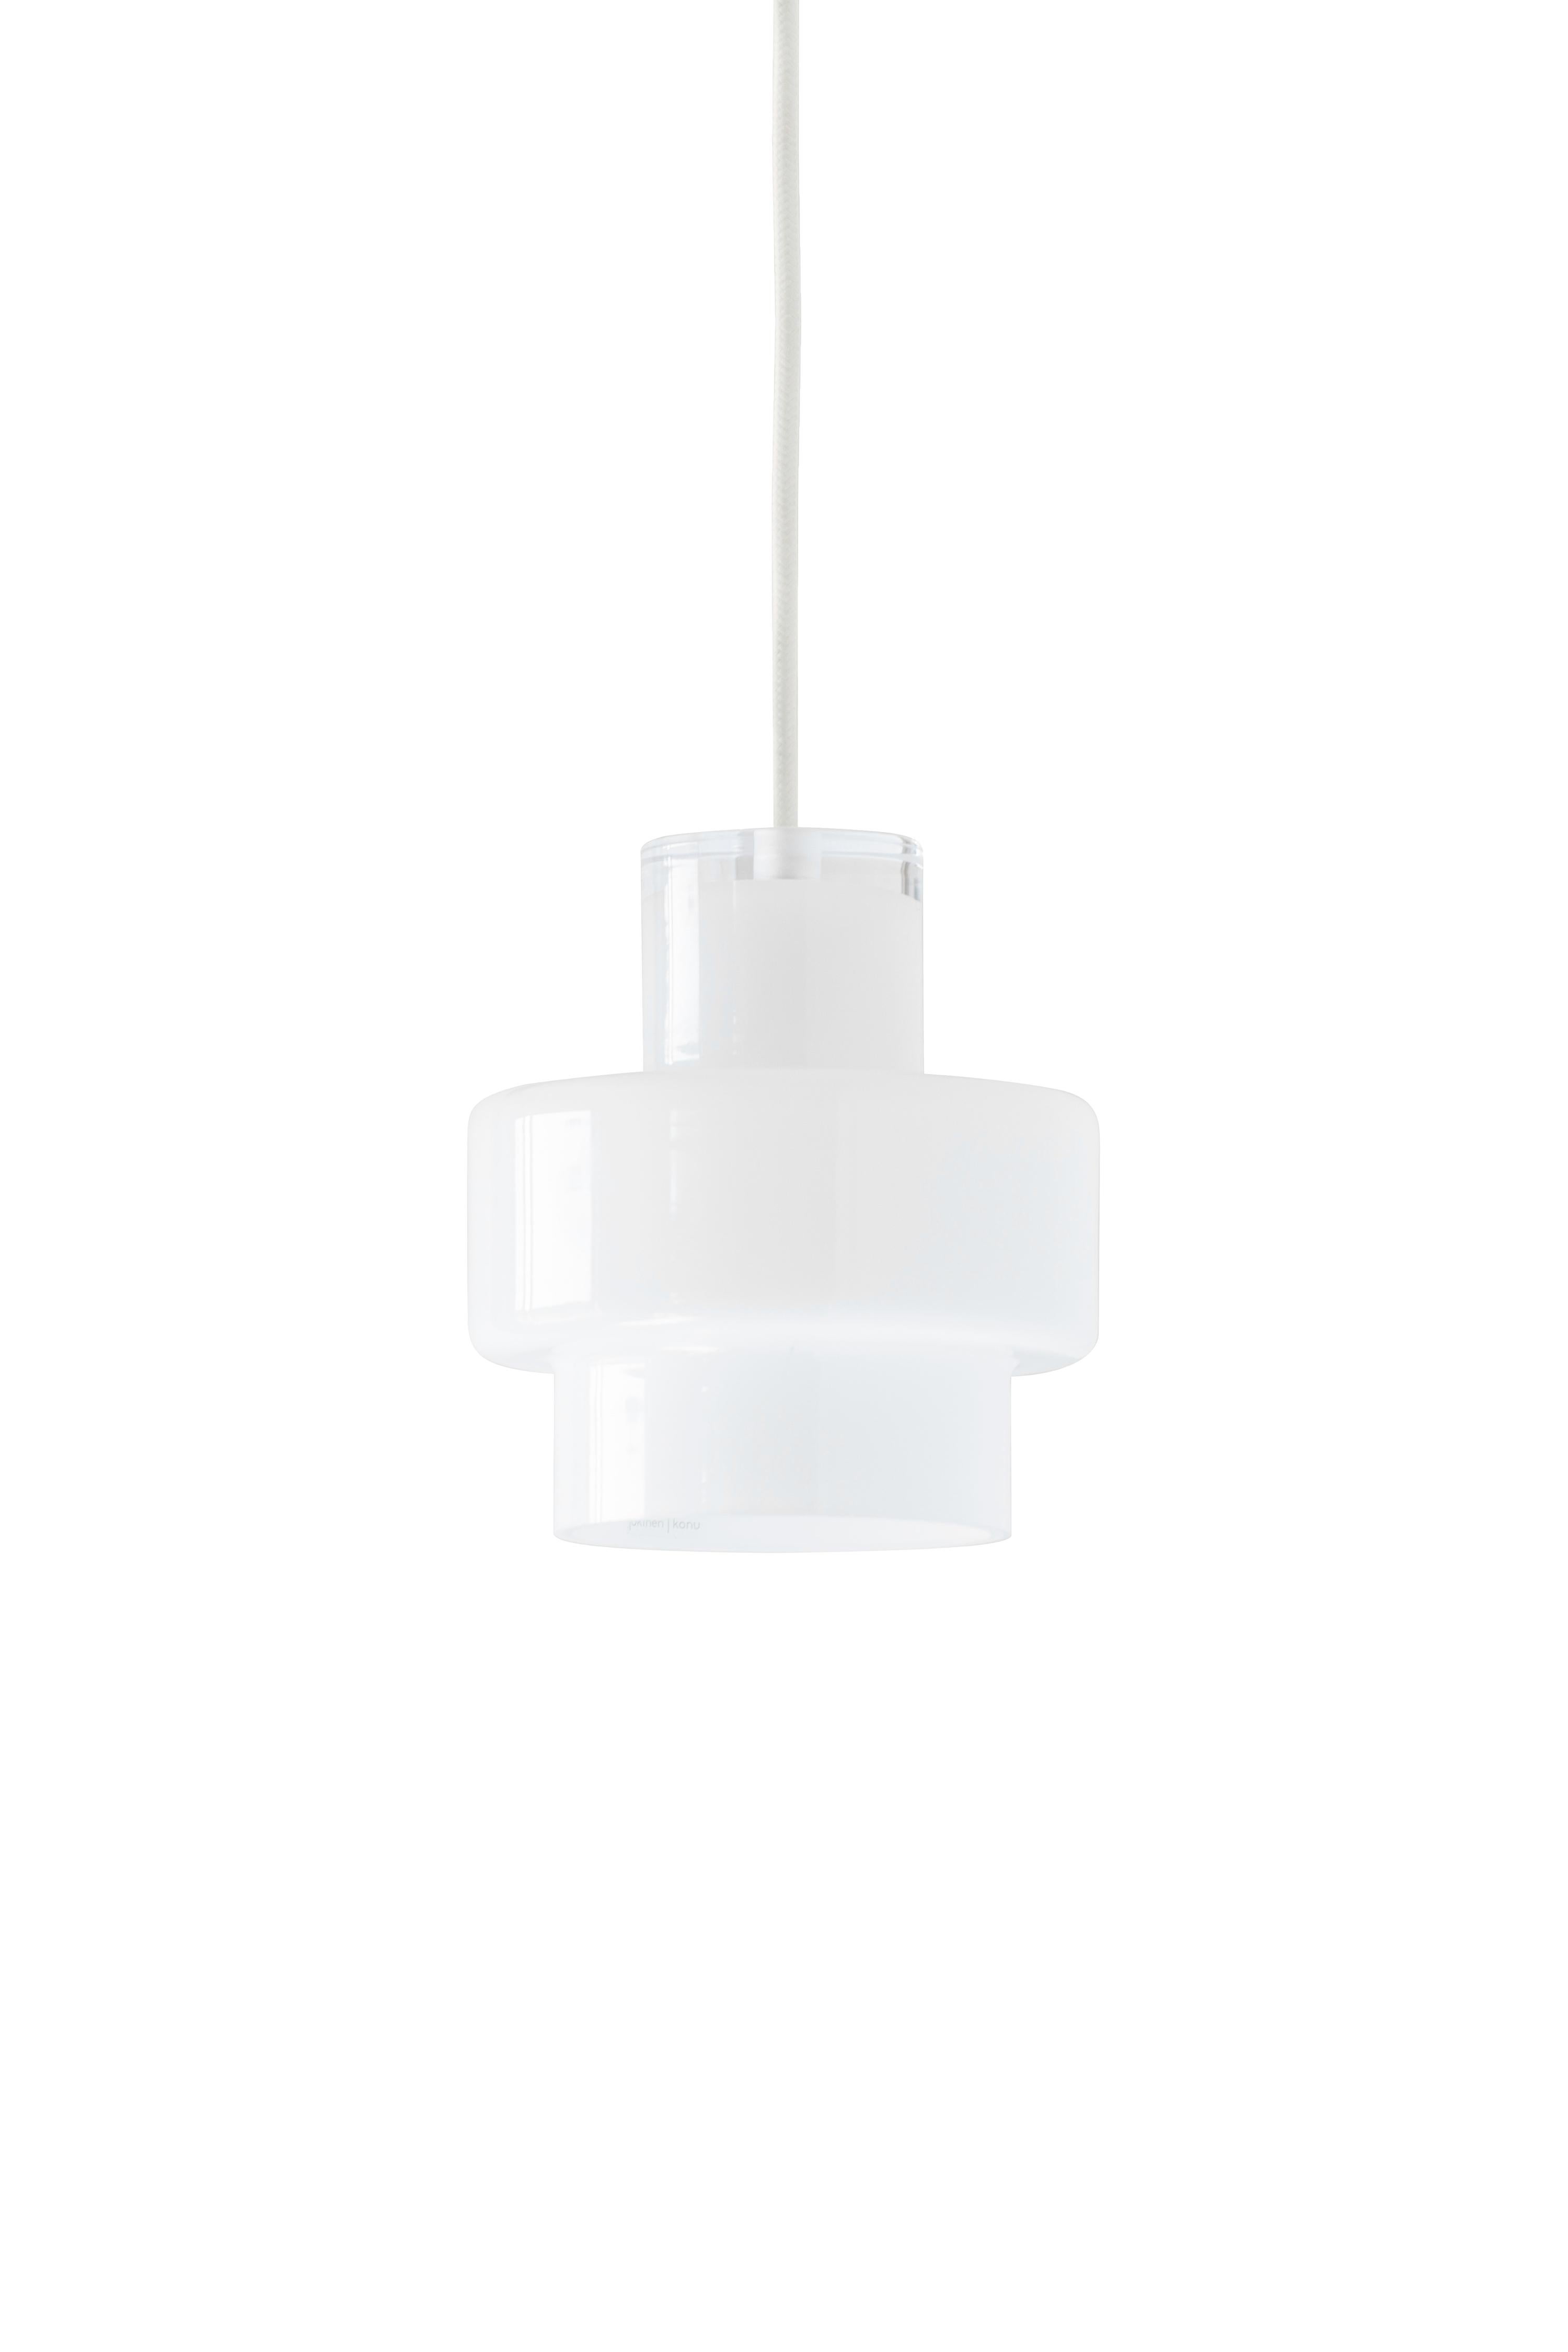 'Multi L' Glass Pendant in White by Jokinen and Konu for Innolux For Sale 4